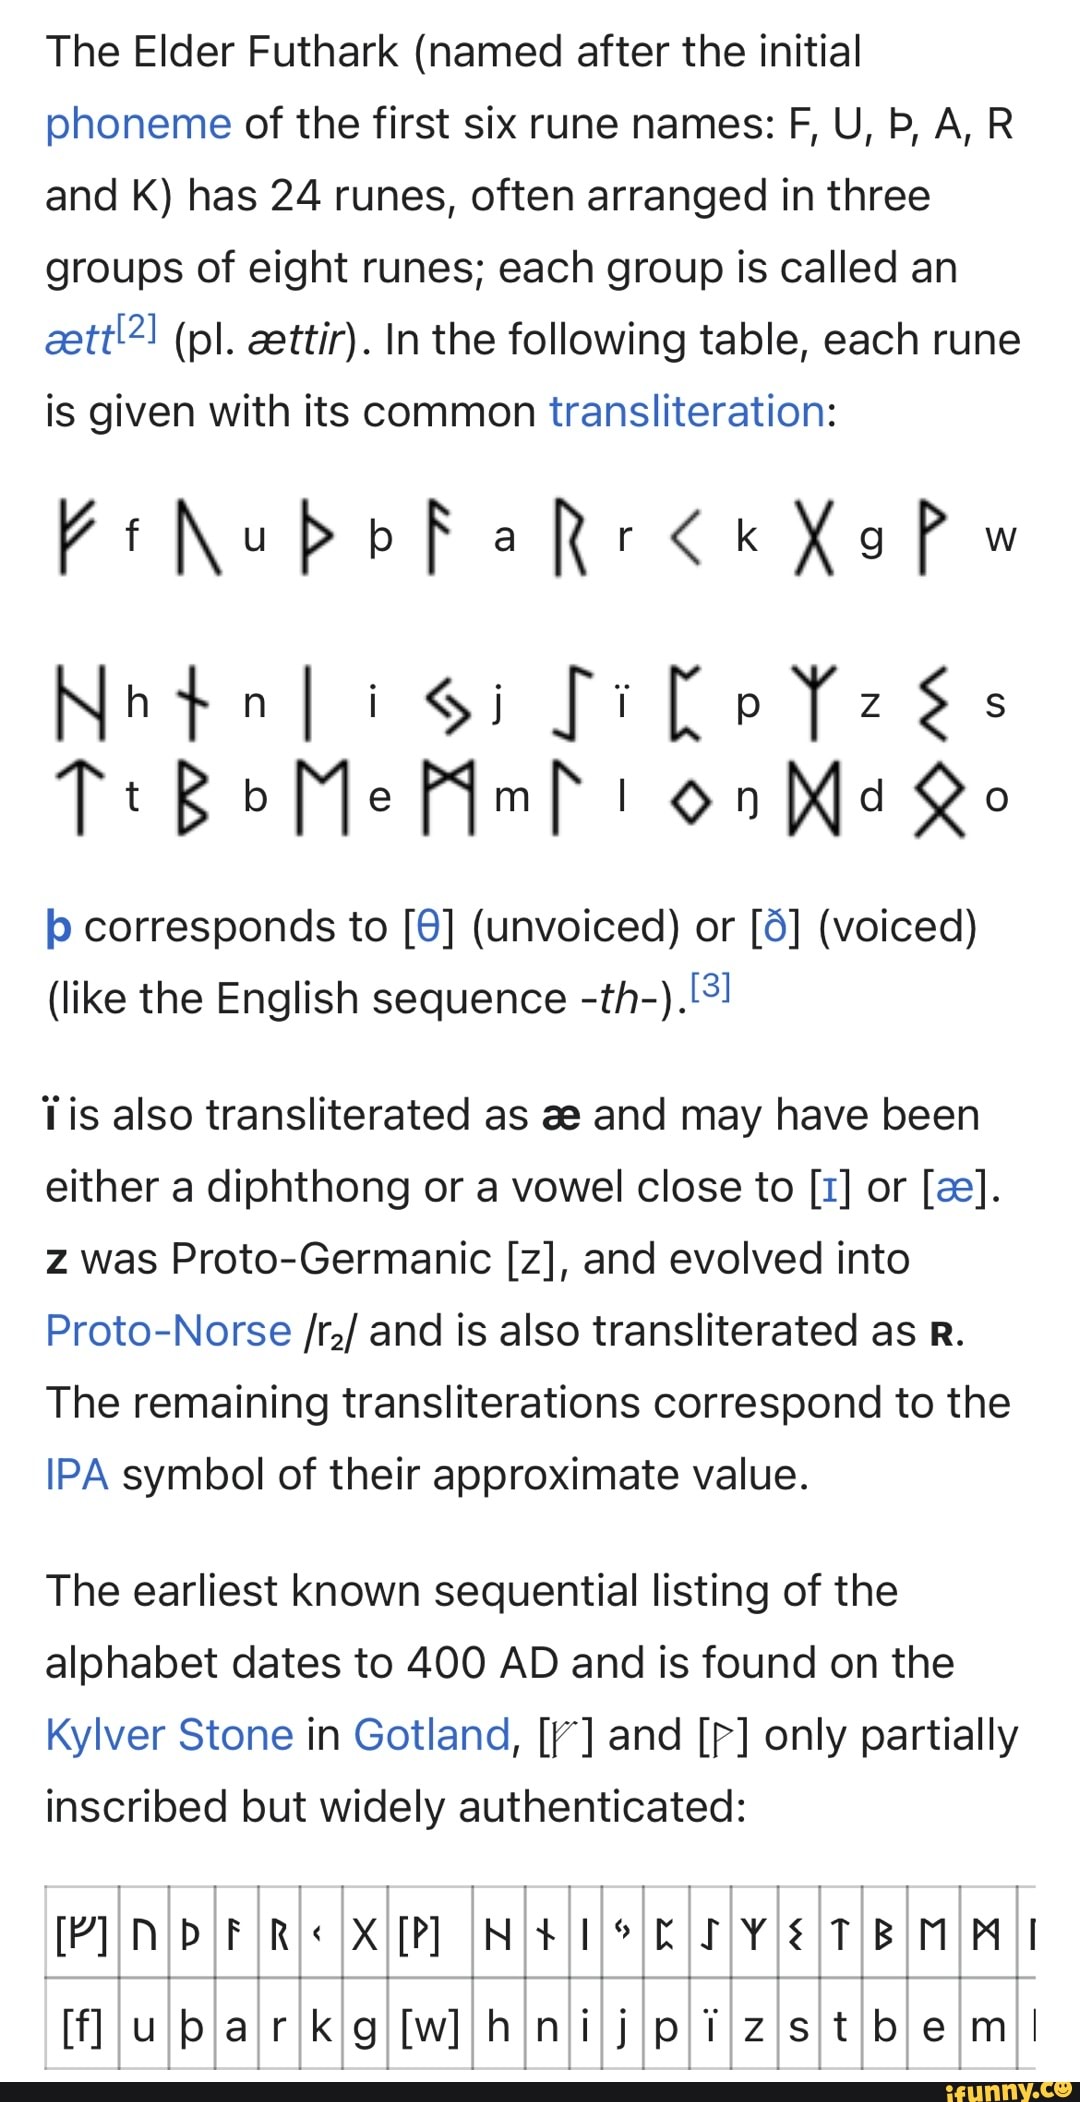 Ancient Rune Alphabet with Names of Runes and Transliteration To